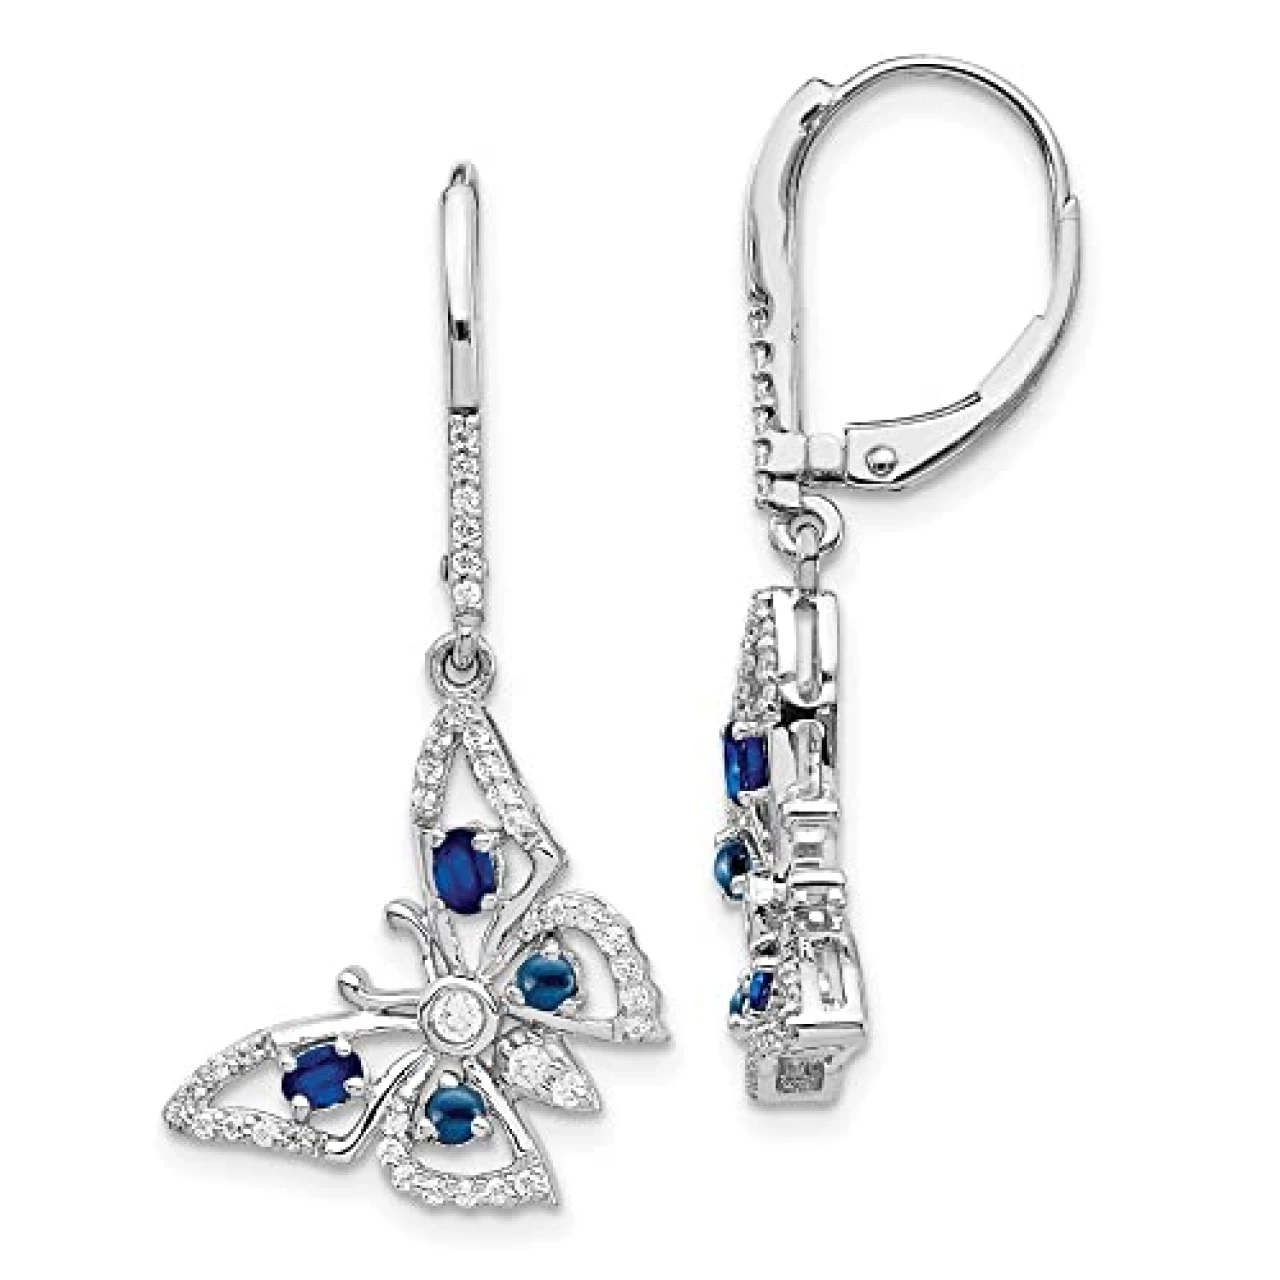 Auriga Fine Jewelry 14k White Gold Diamond and Sapphire Butterfly Leverback Dangle Earrings Gift for Women